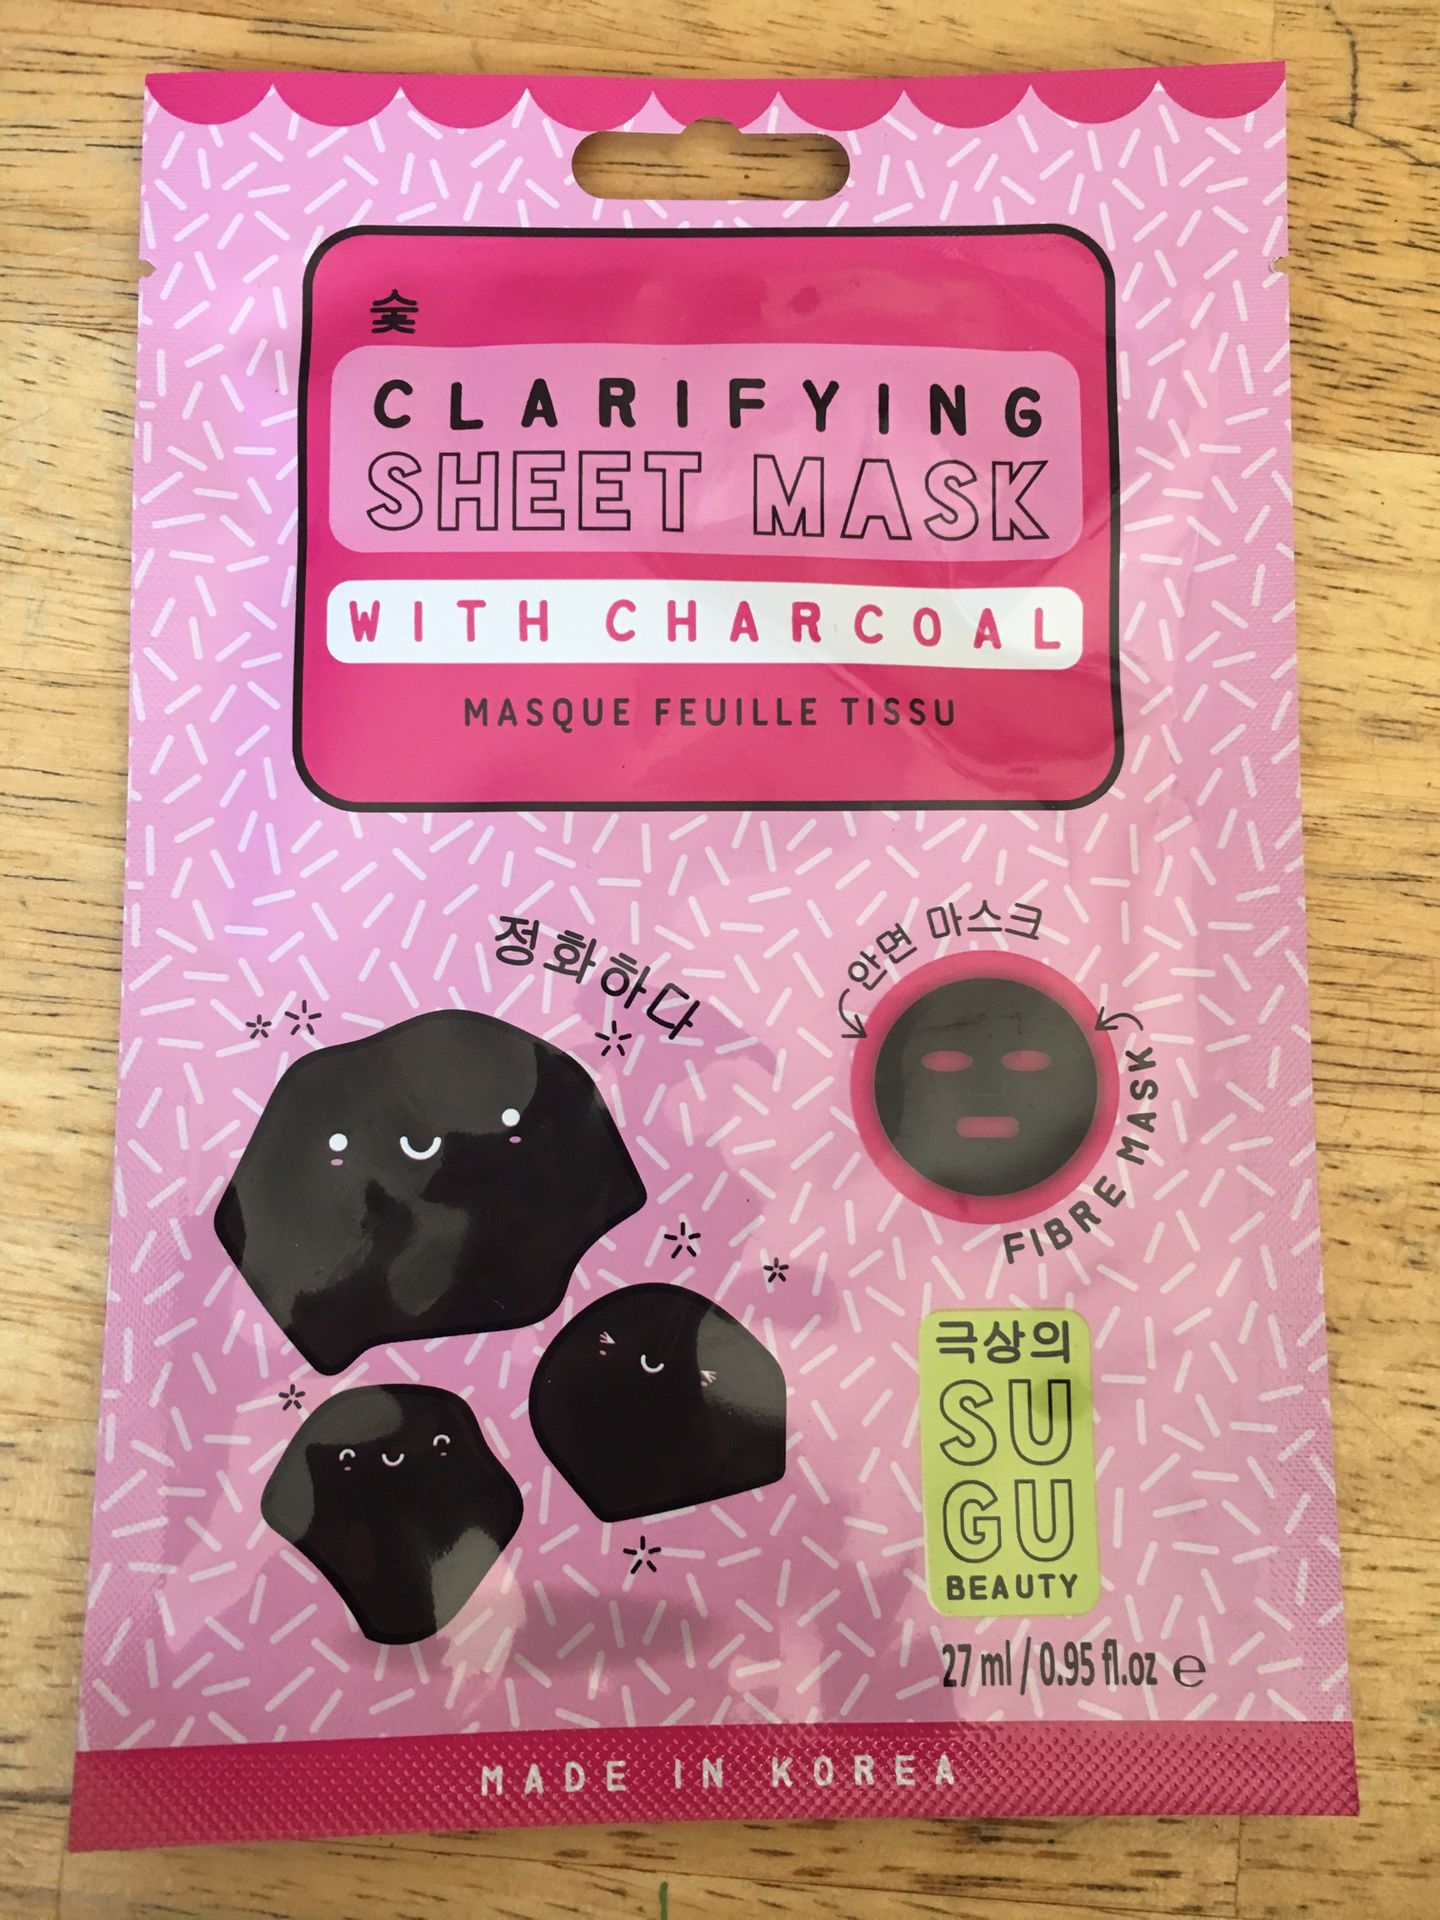 Face Mask - sheet mask with charcoal